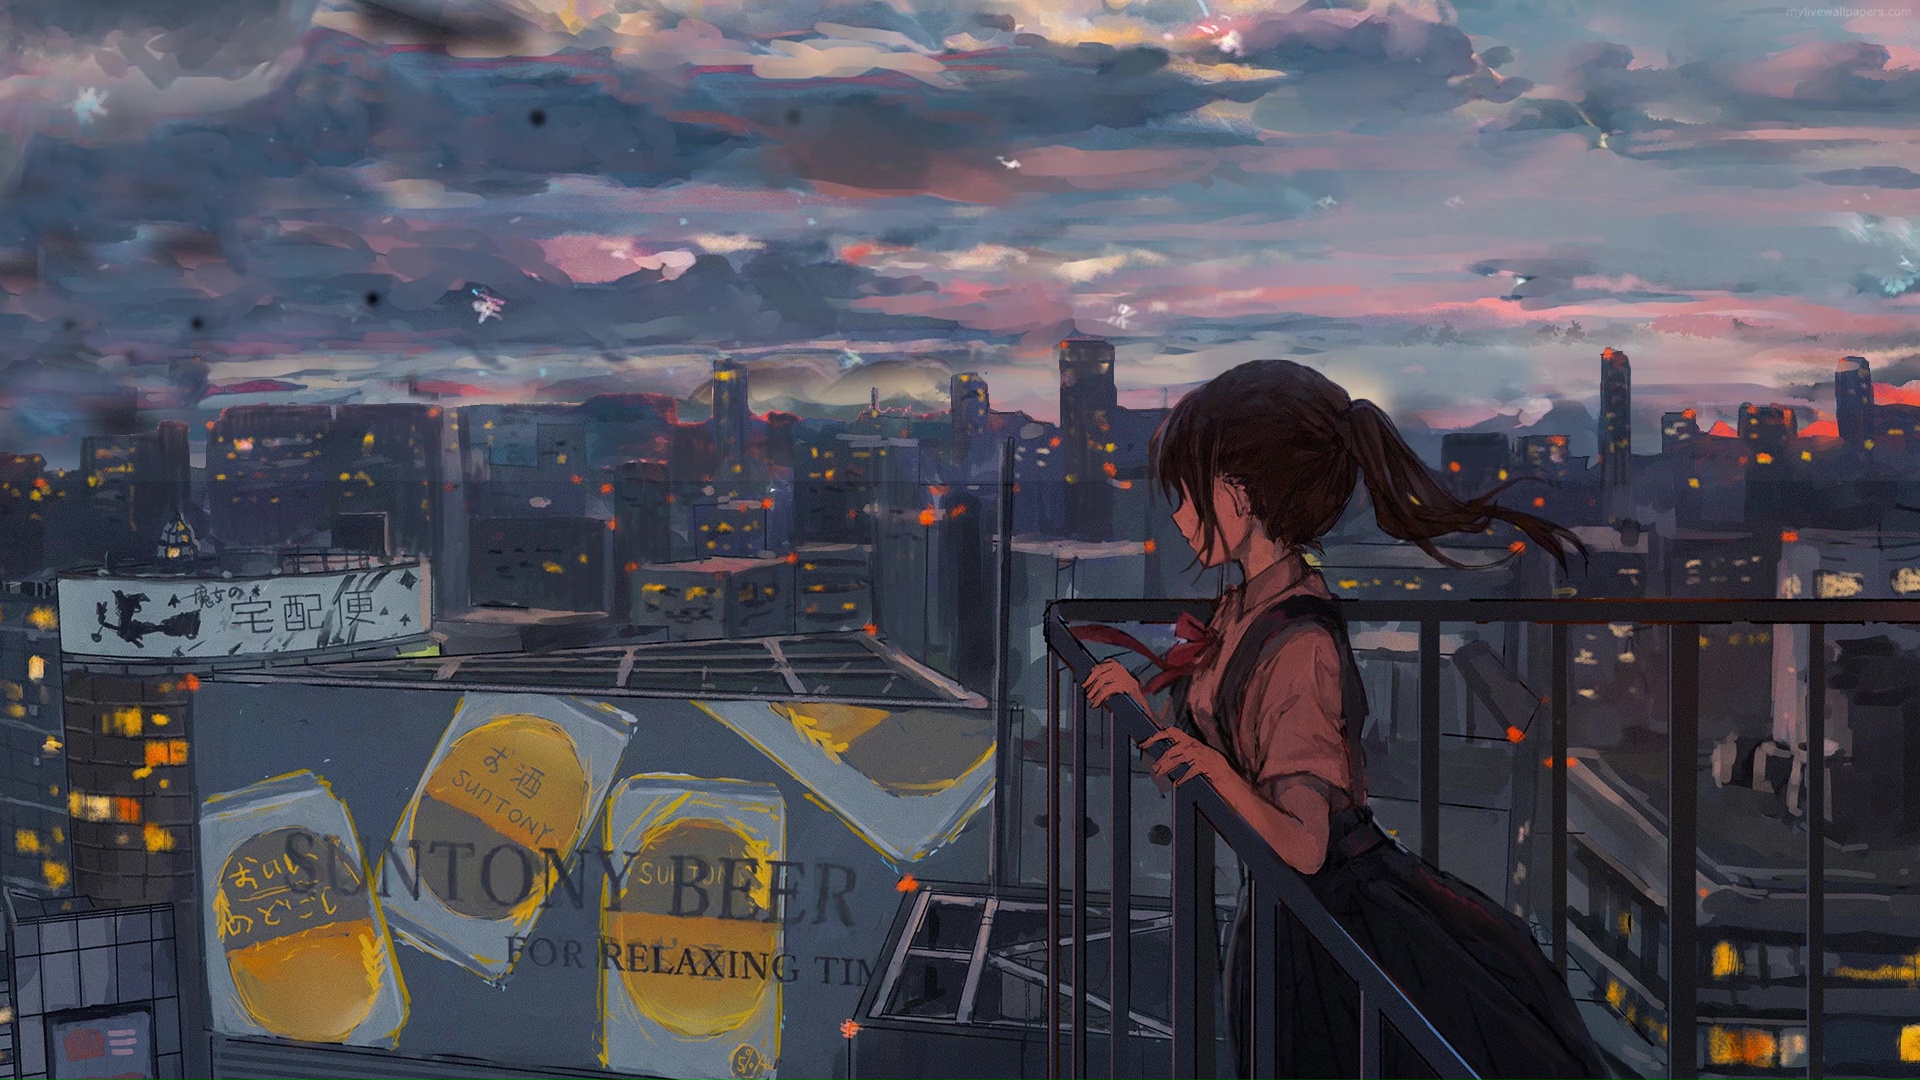 Kimi No Na Wa Your Name Taki Stars Balcony Poster Anime Canvas Poster Wall  Art Decor Picture Painting for Living Room Bedroom Decoration Unframe: 40 x  40 cm : Amazon.de: Home & Kitchen